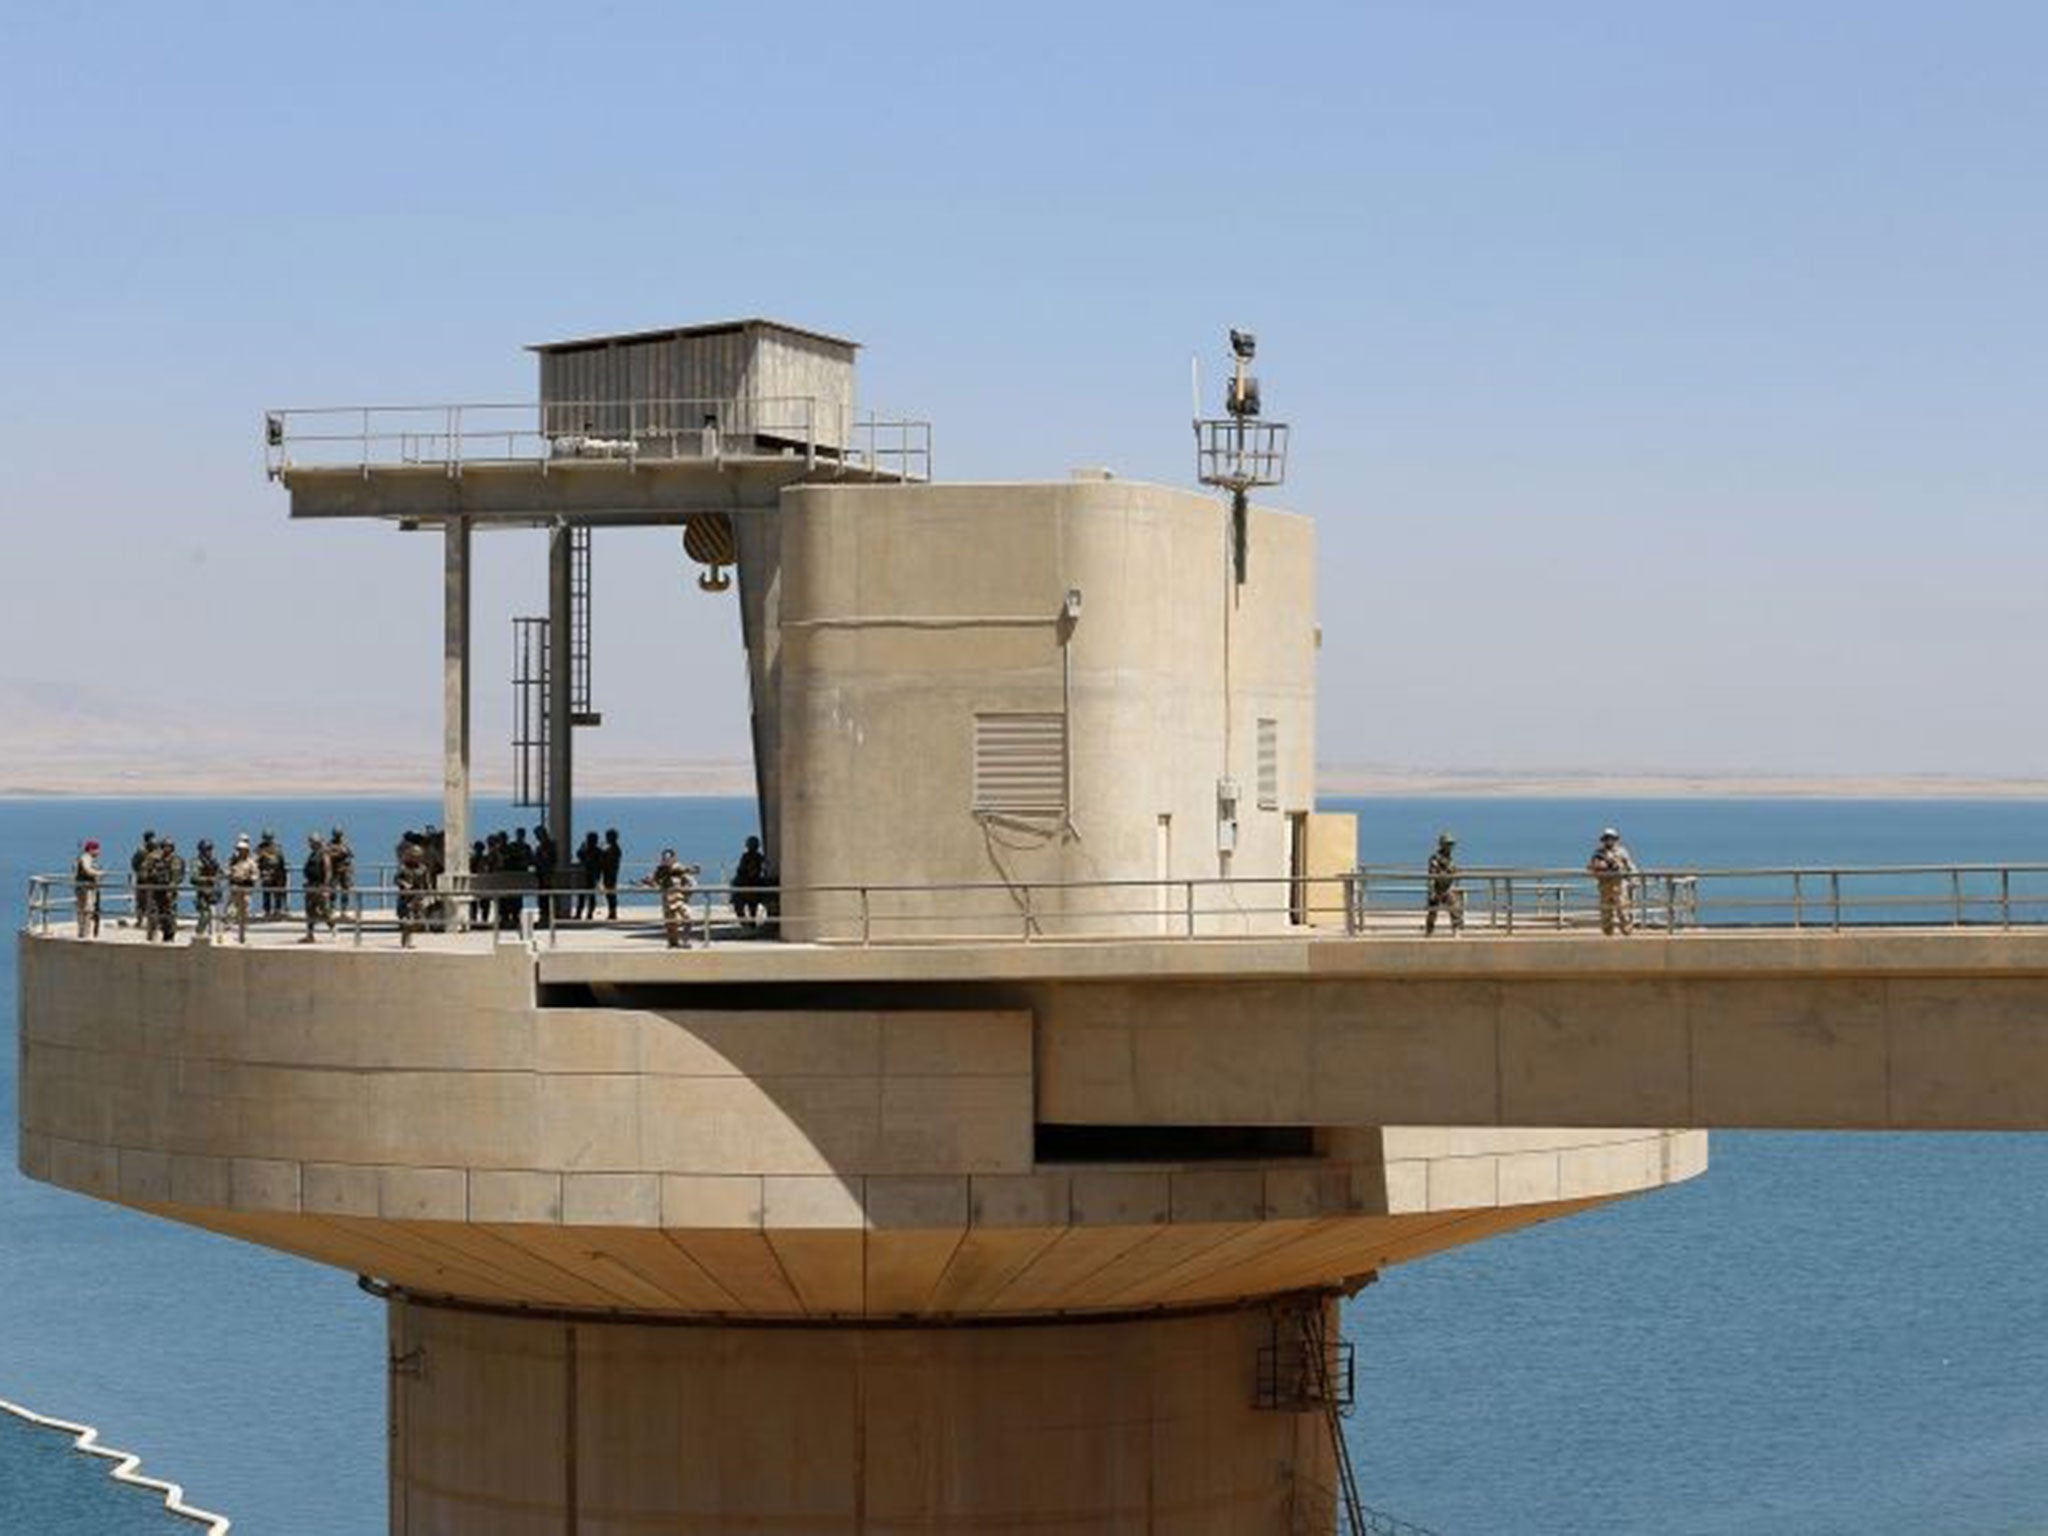 Millions of people will be affected if the Mosul Dam fails